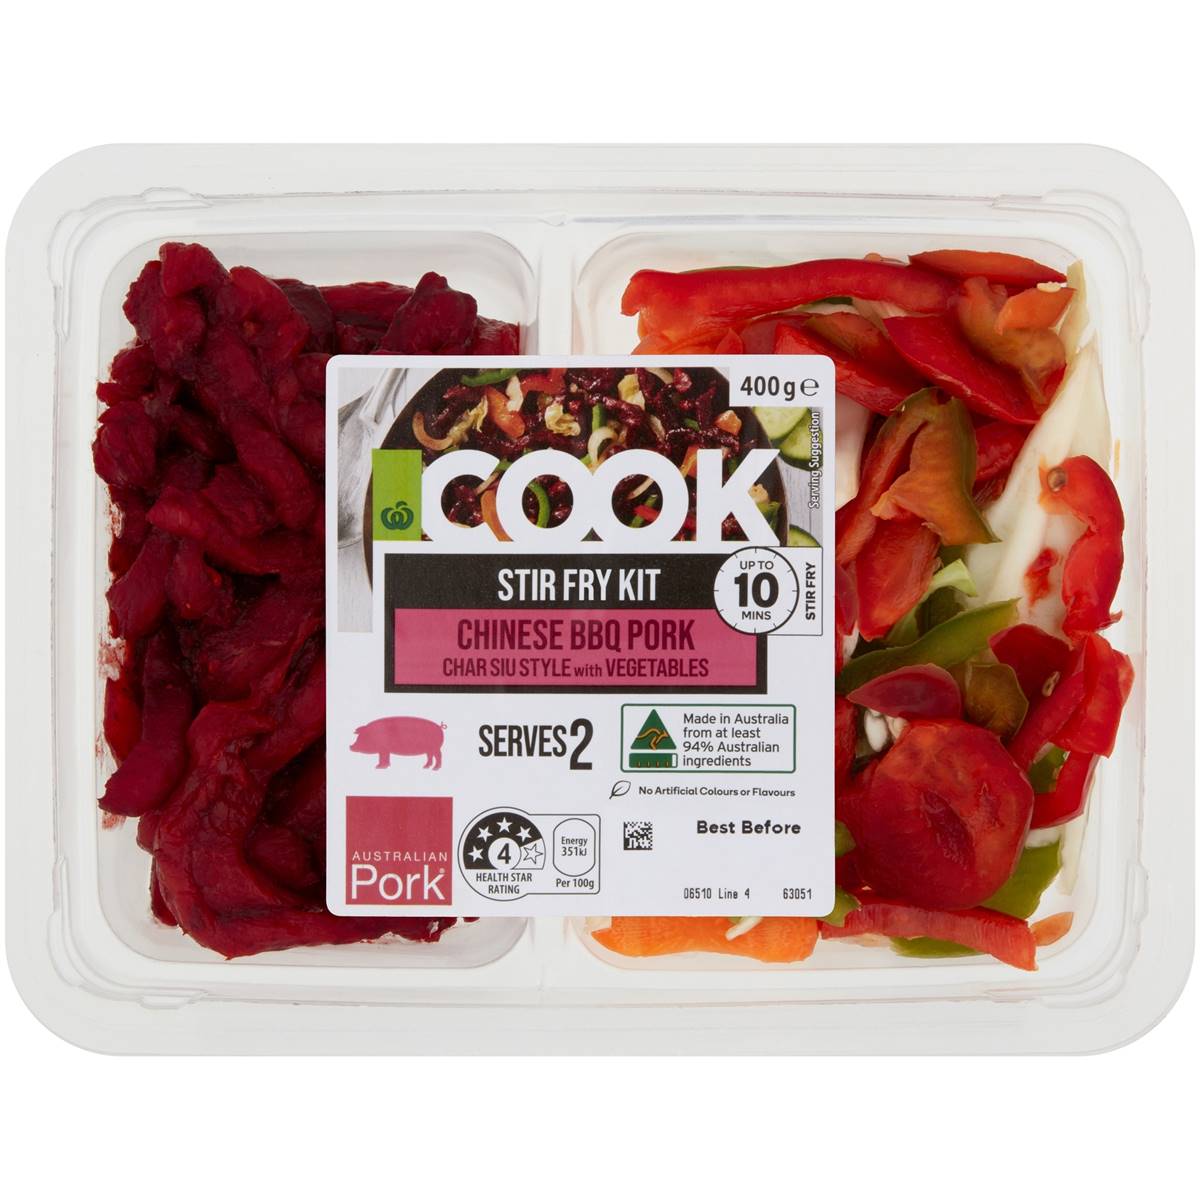 Calories in Woolworths Cook Stir Fry Kit Chinese Bbq Pork Char Siu With Veges